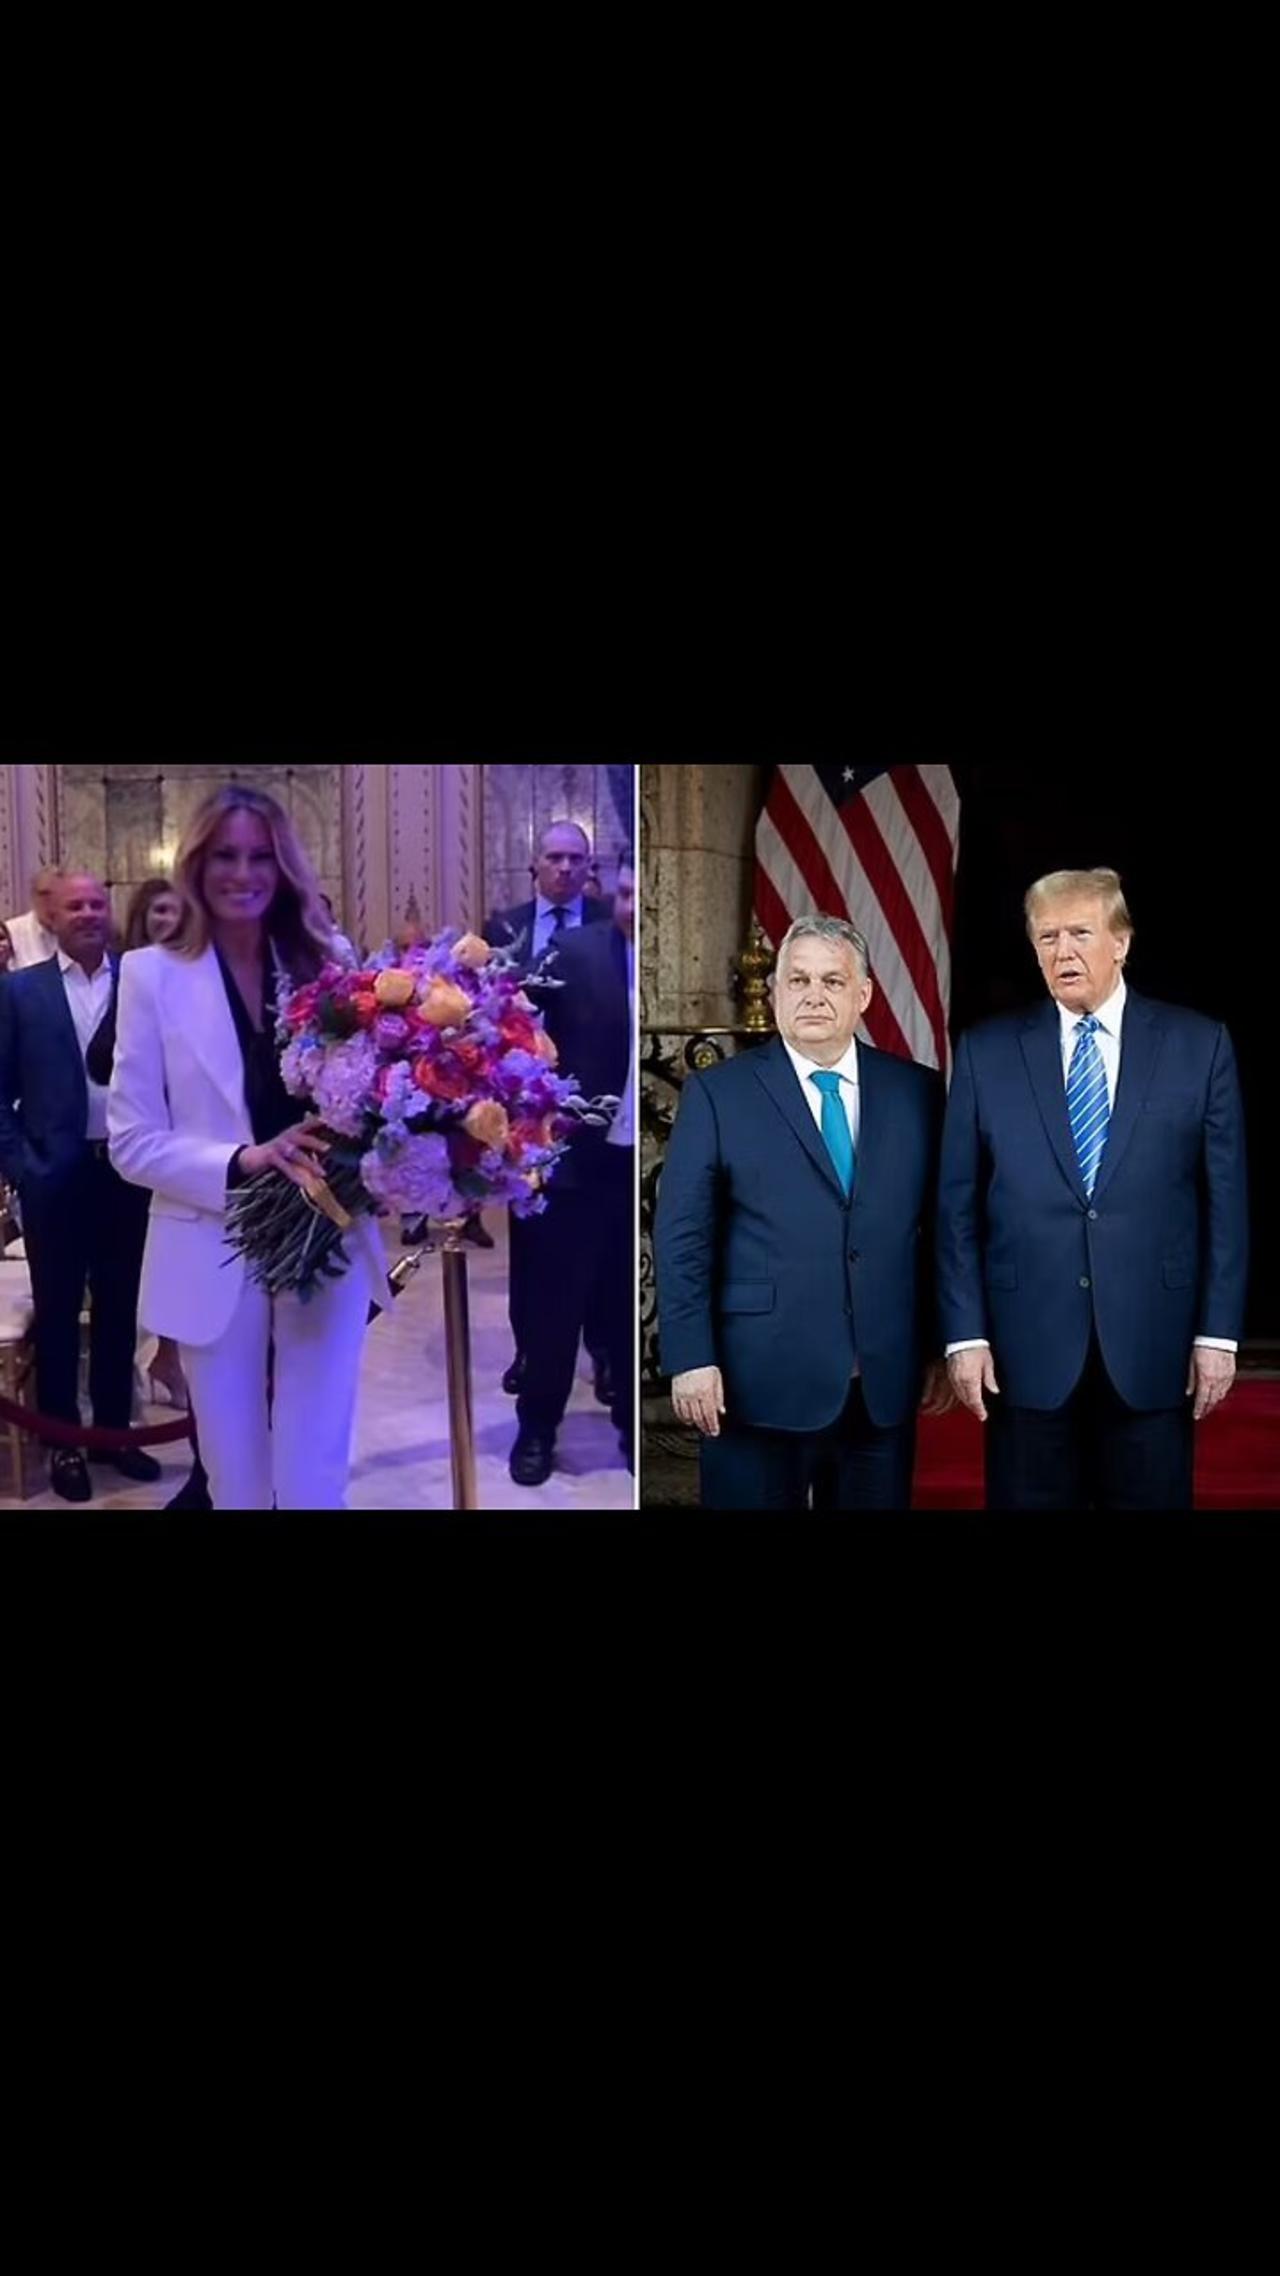 Orbán-Trump Summit at Mar-a-Lago: A Convergence of Power, Allegiance, and the Pursuit of Peace